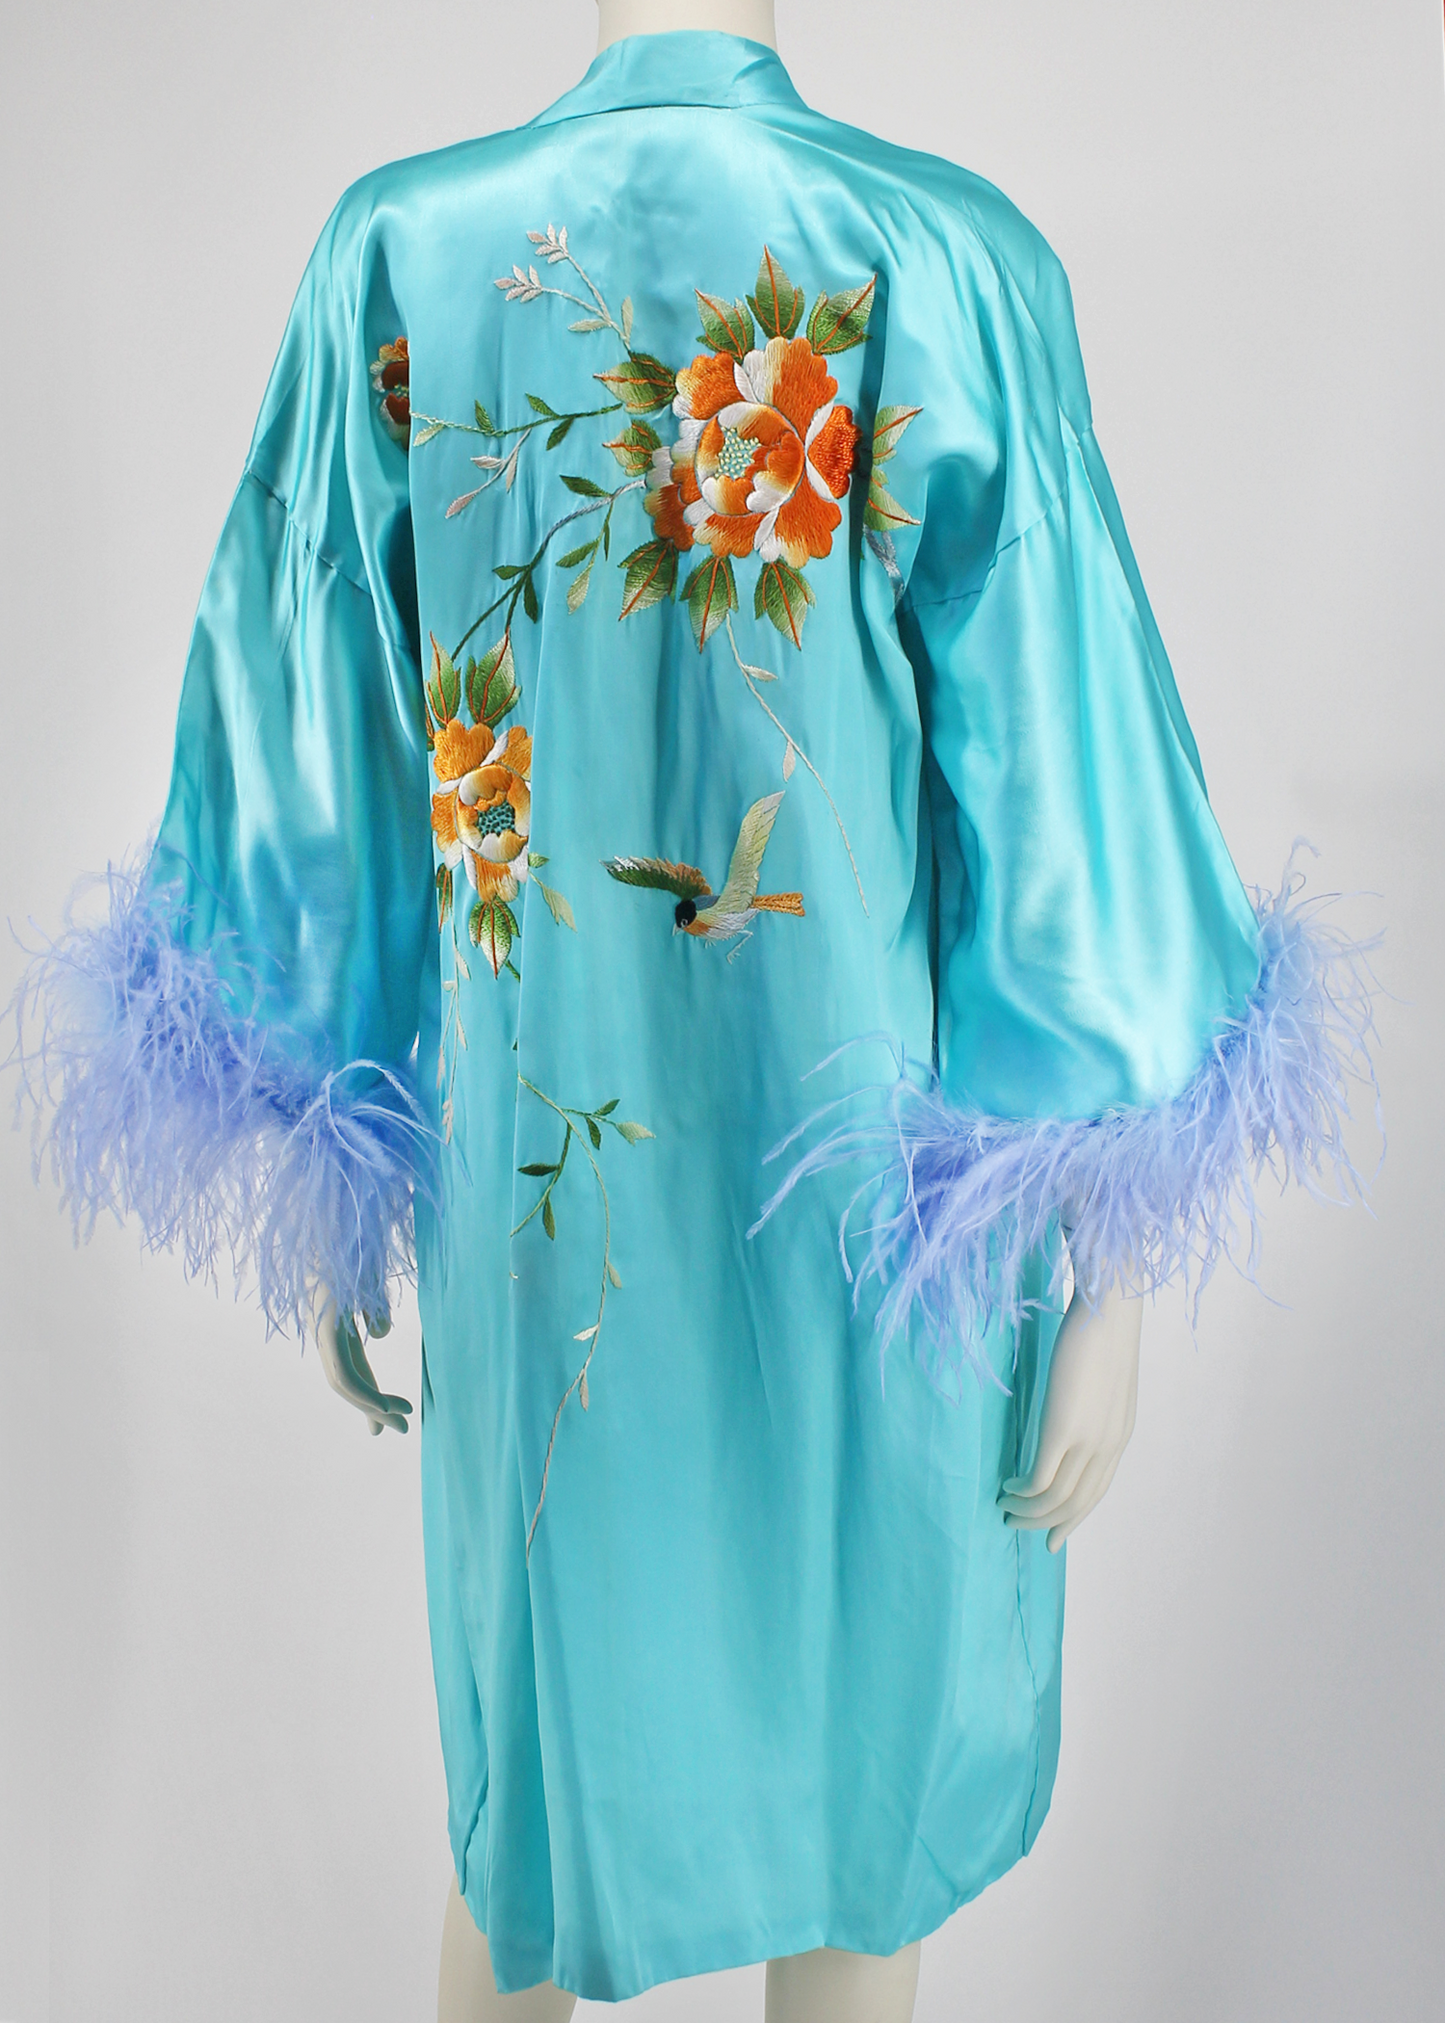 Dauphinette 1960s Sky Blue Hand-Embroidered Robe with Feathers